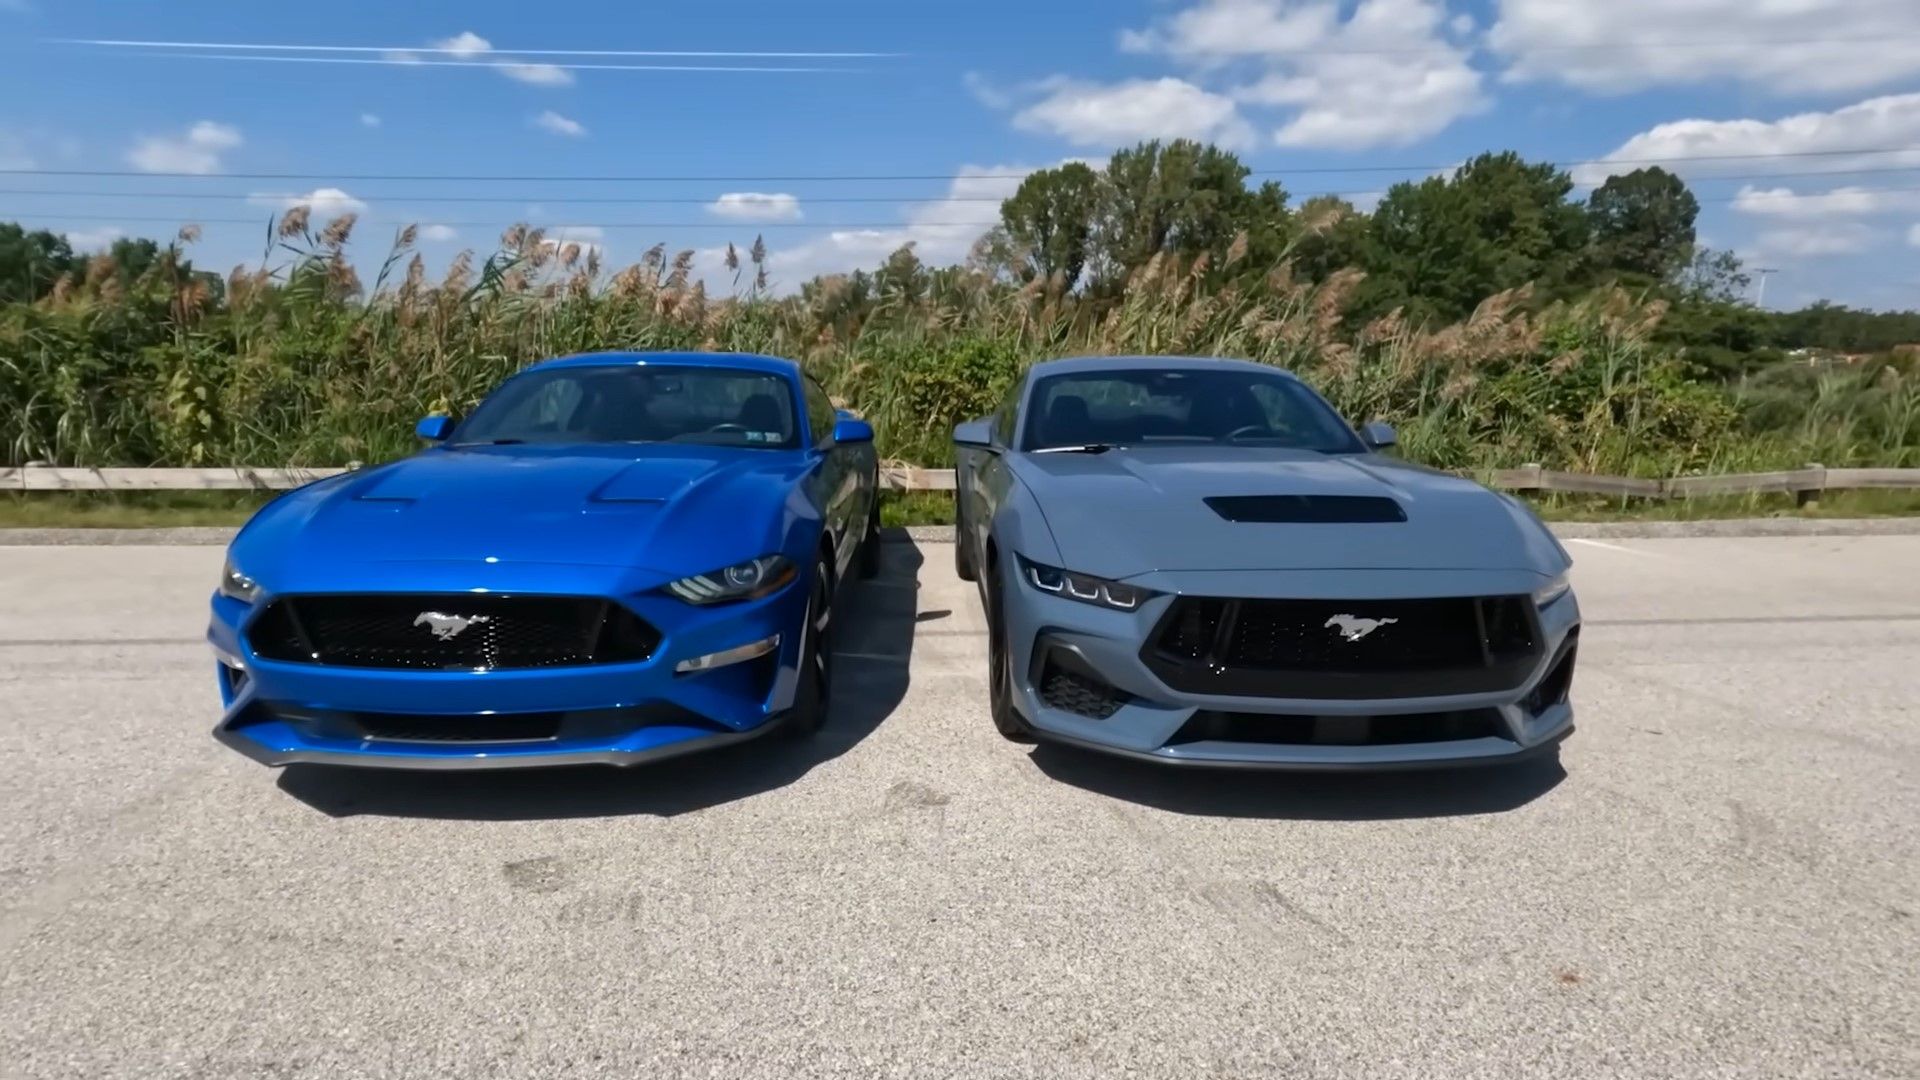 A blue 2024 Ford Mustang GT S650 vs a dark blue 2019 Ford Mustang GT S550 front shot